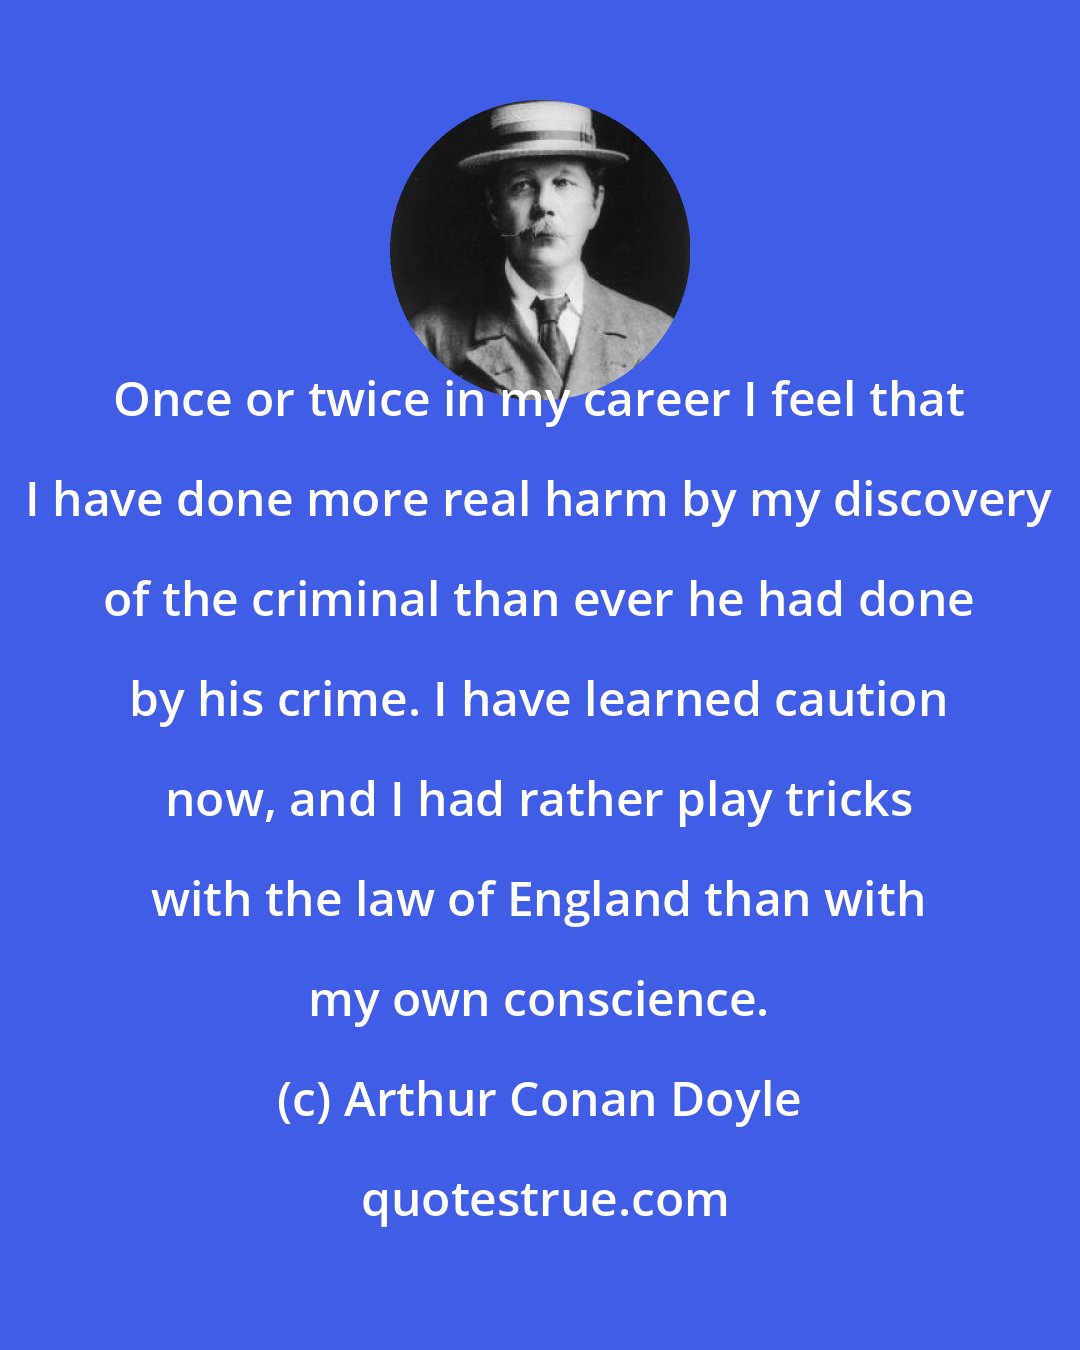 Arthur Conan Doyle: Once or twice in my career I feel that I have done more real harm by my discovery of the criminal than ever he had done by his crime. I have learned caution now, and I had rather play tricks with the law of England than with my own conscience.